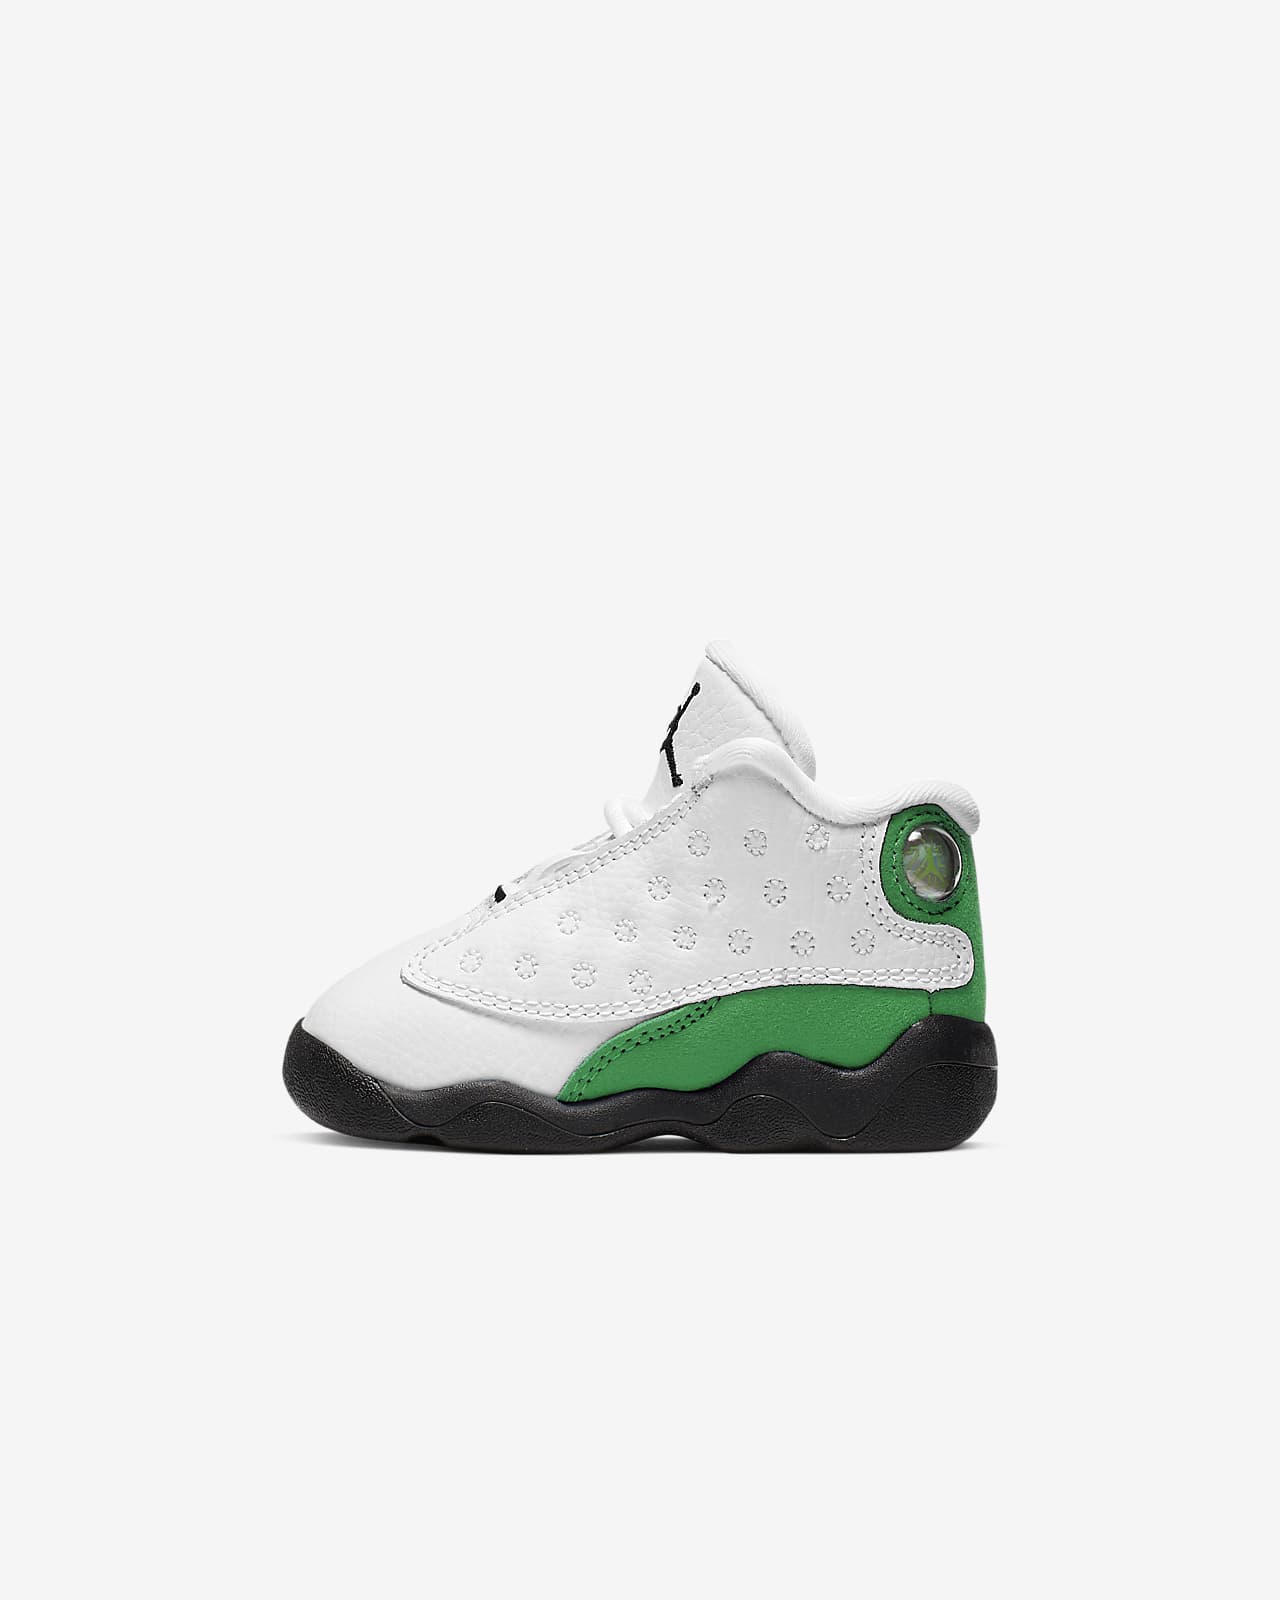 retro 13 for toddlers cheap online